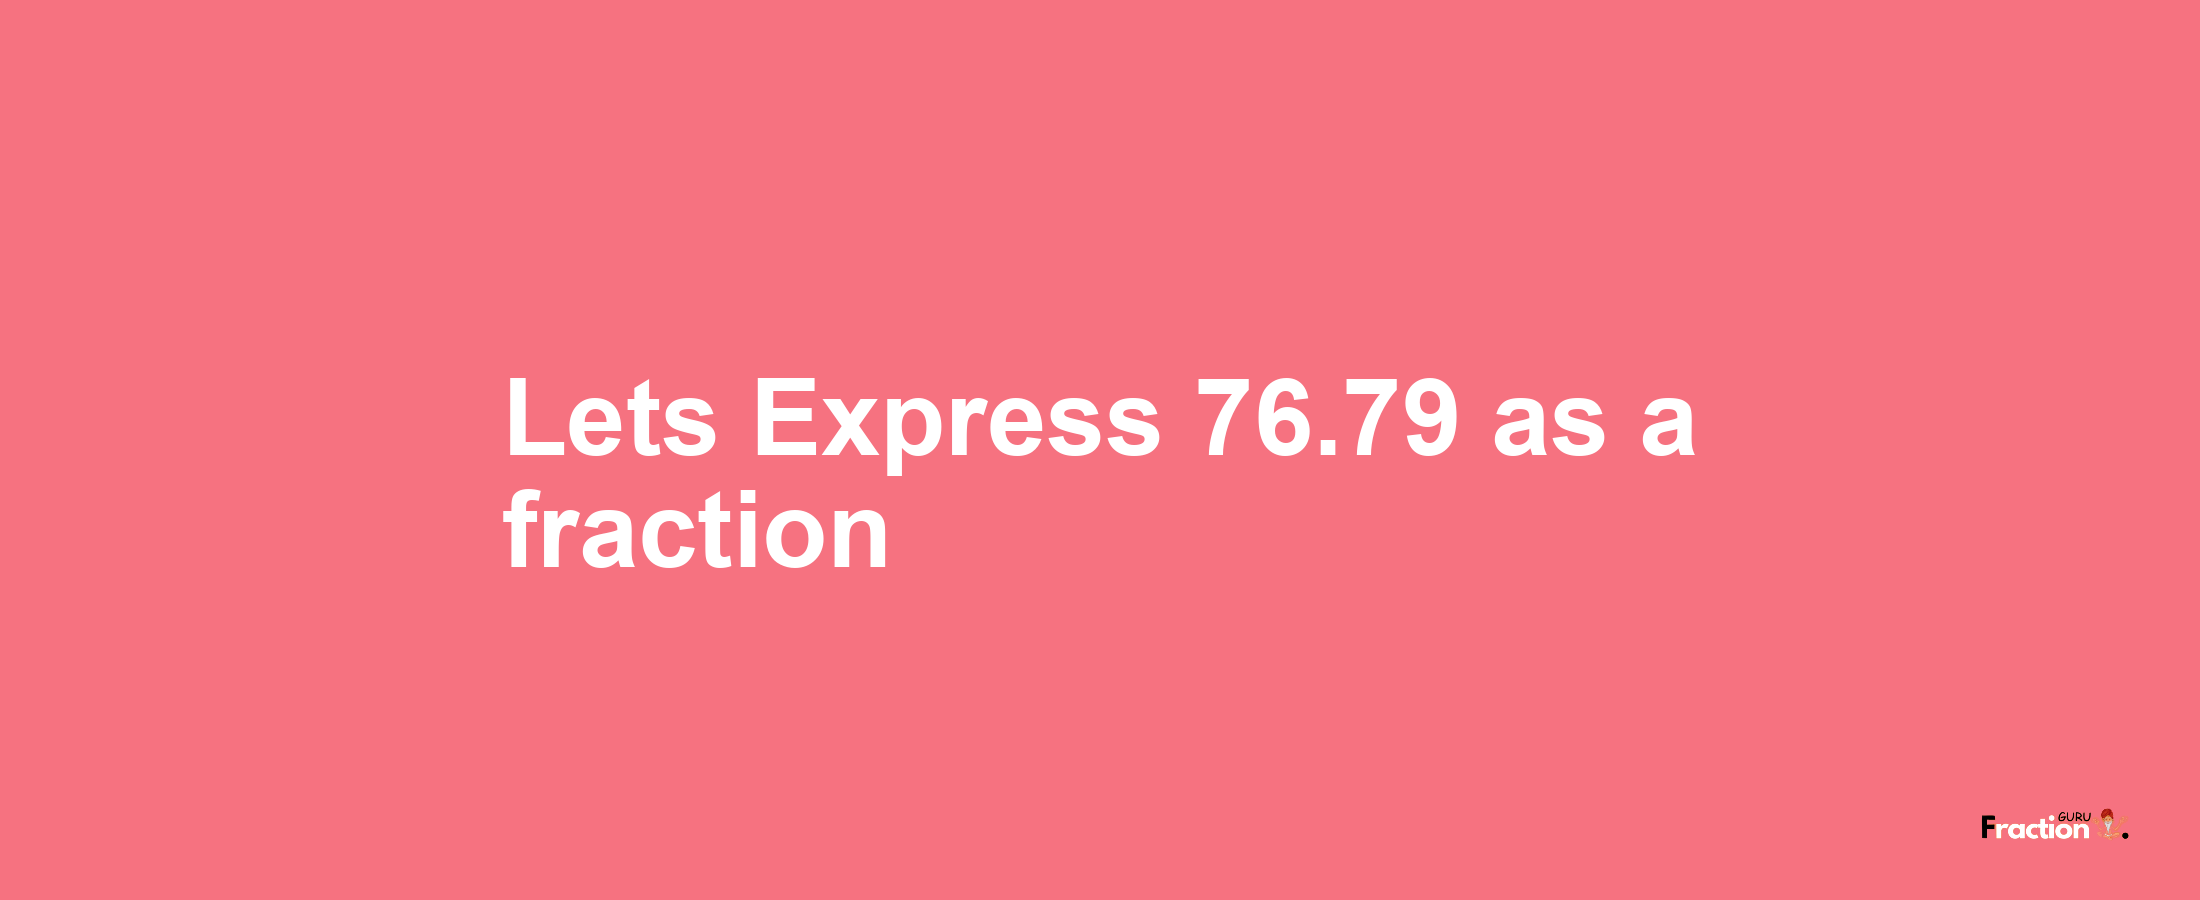 Lets Express 76.79 as afraction